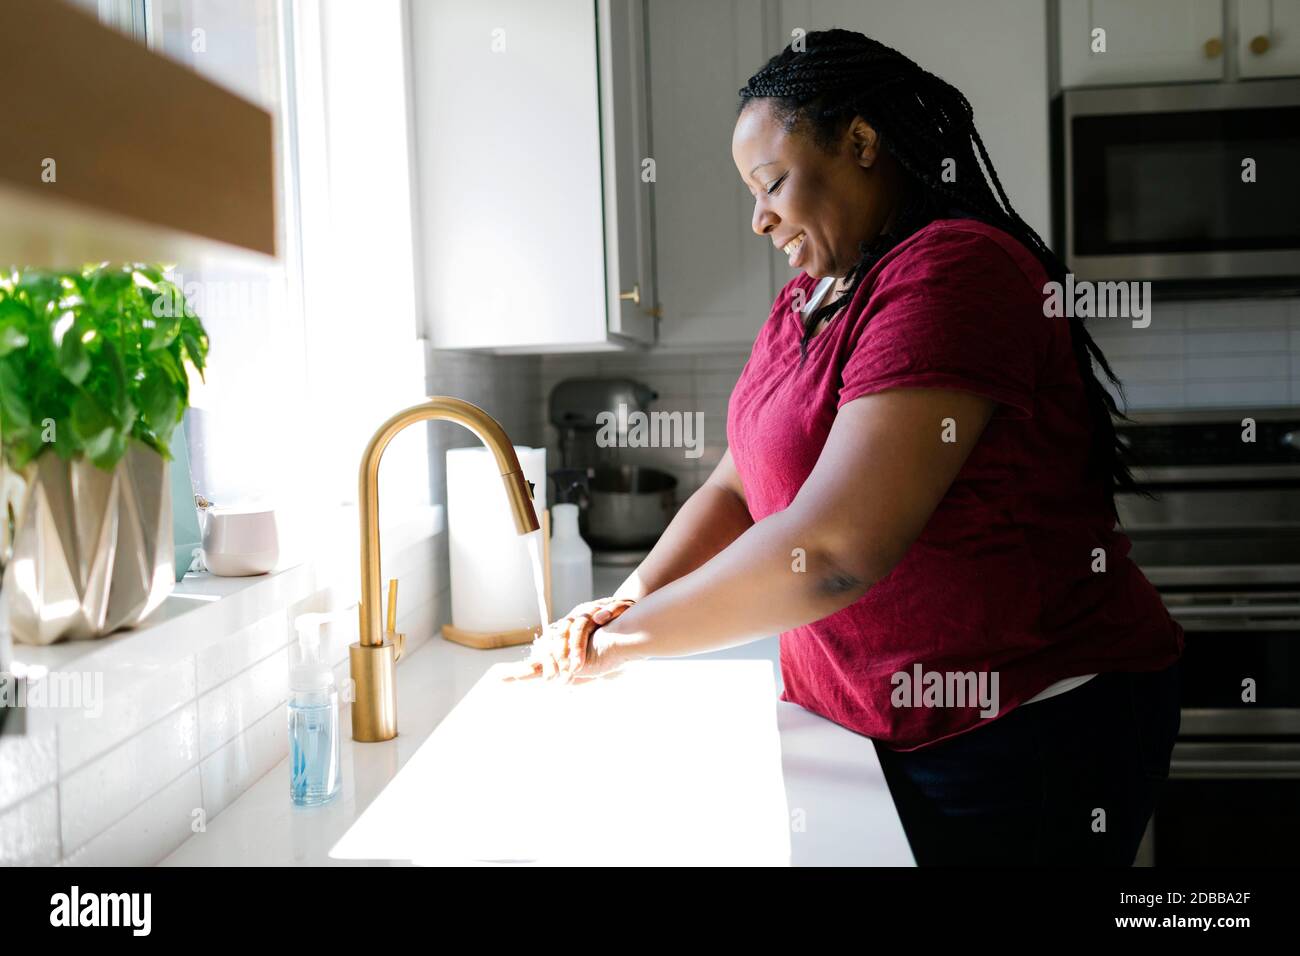 Woman in kitchen sink Banque D'Images